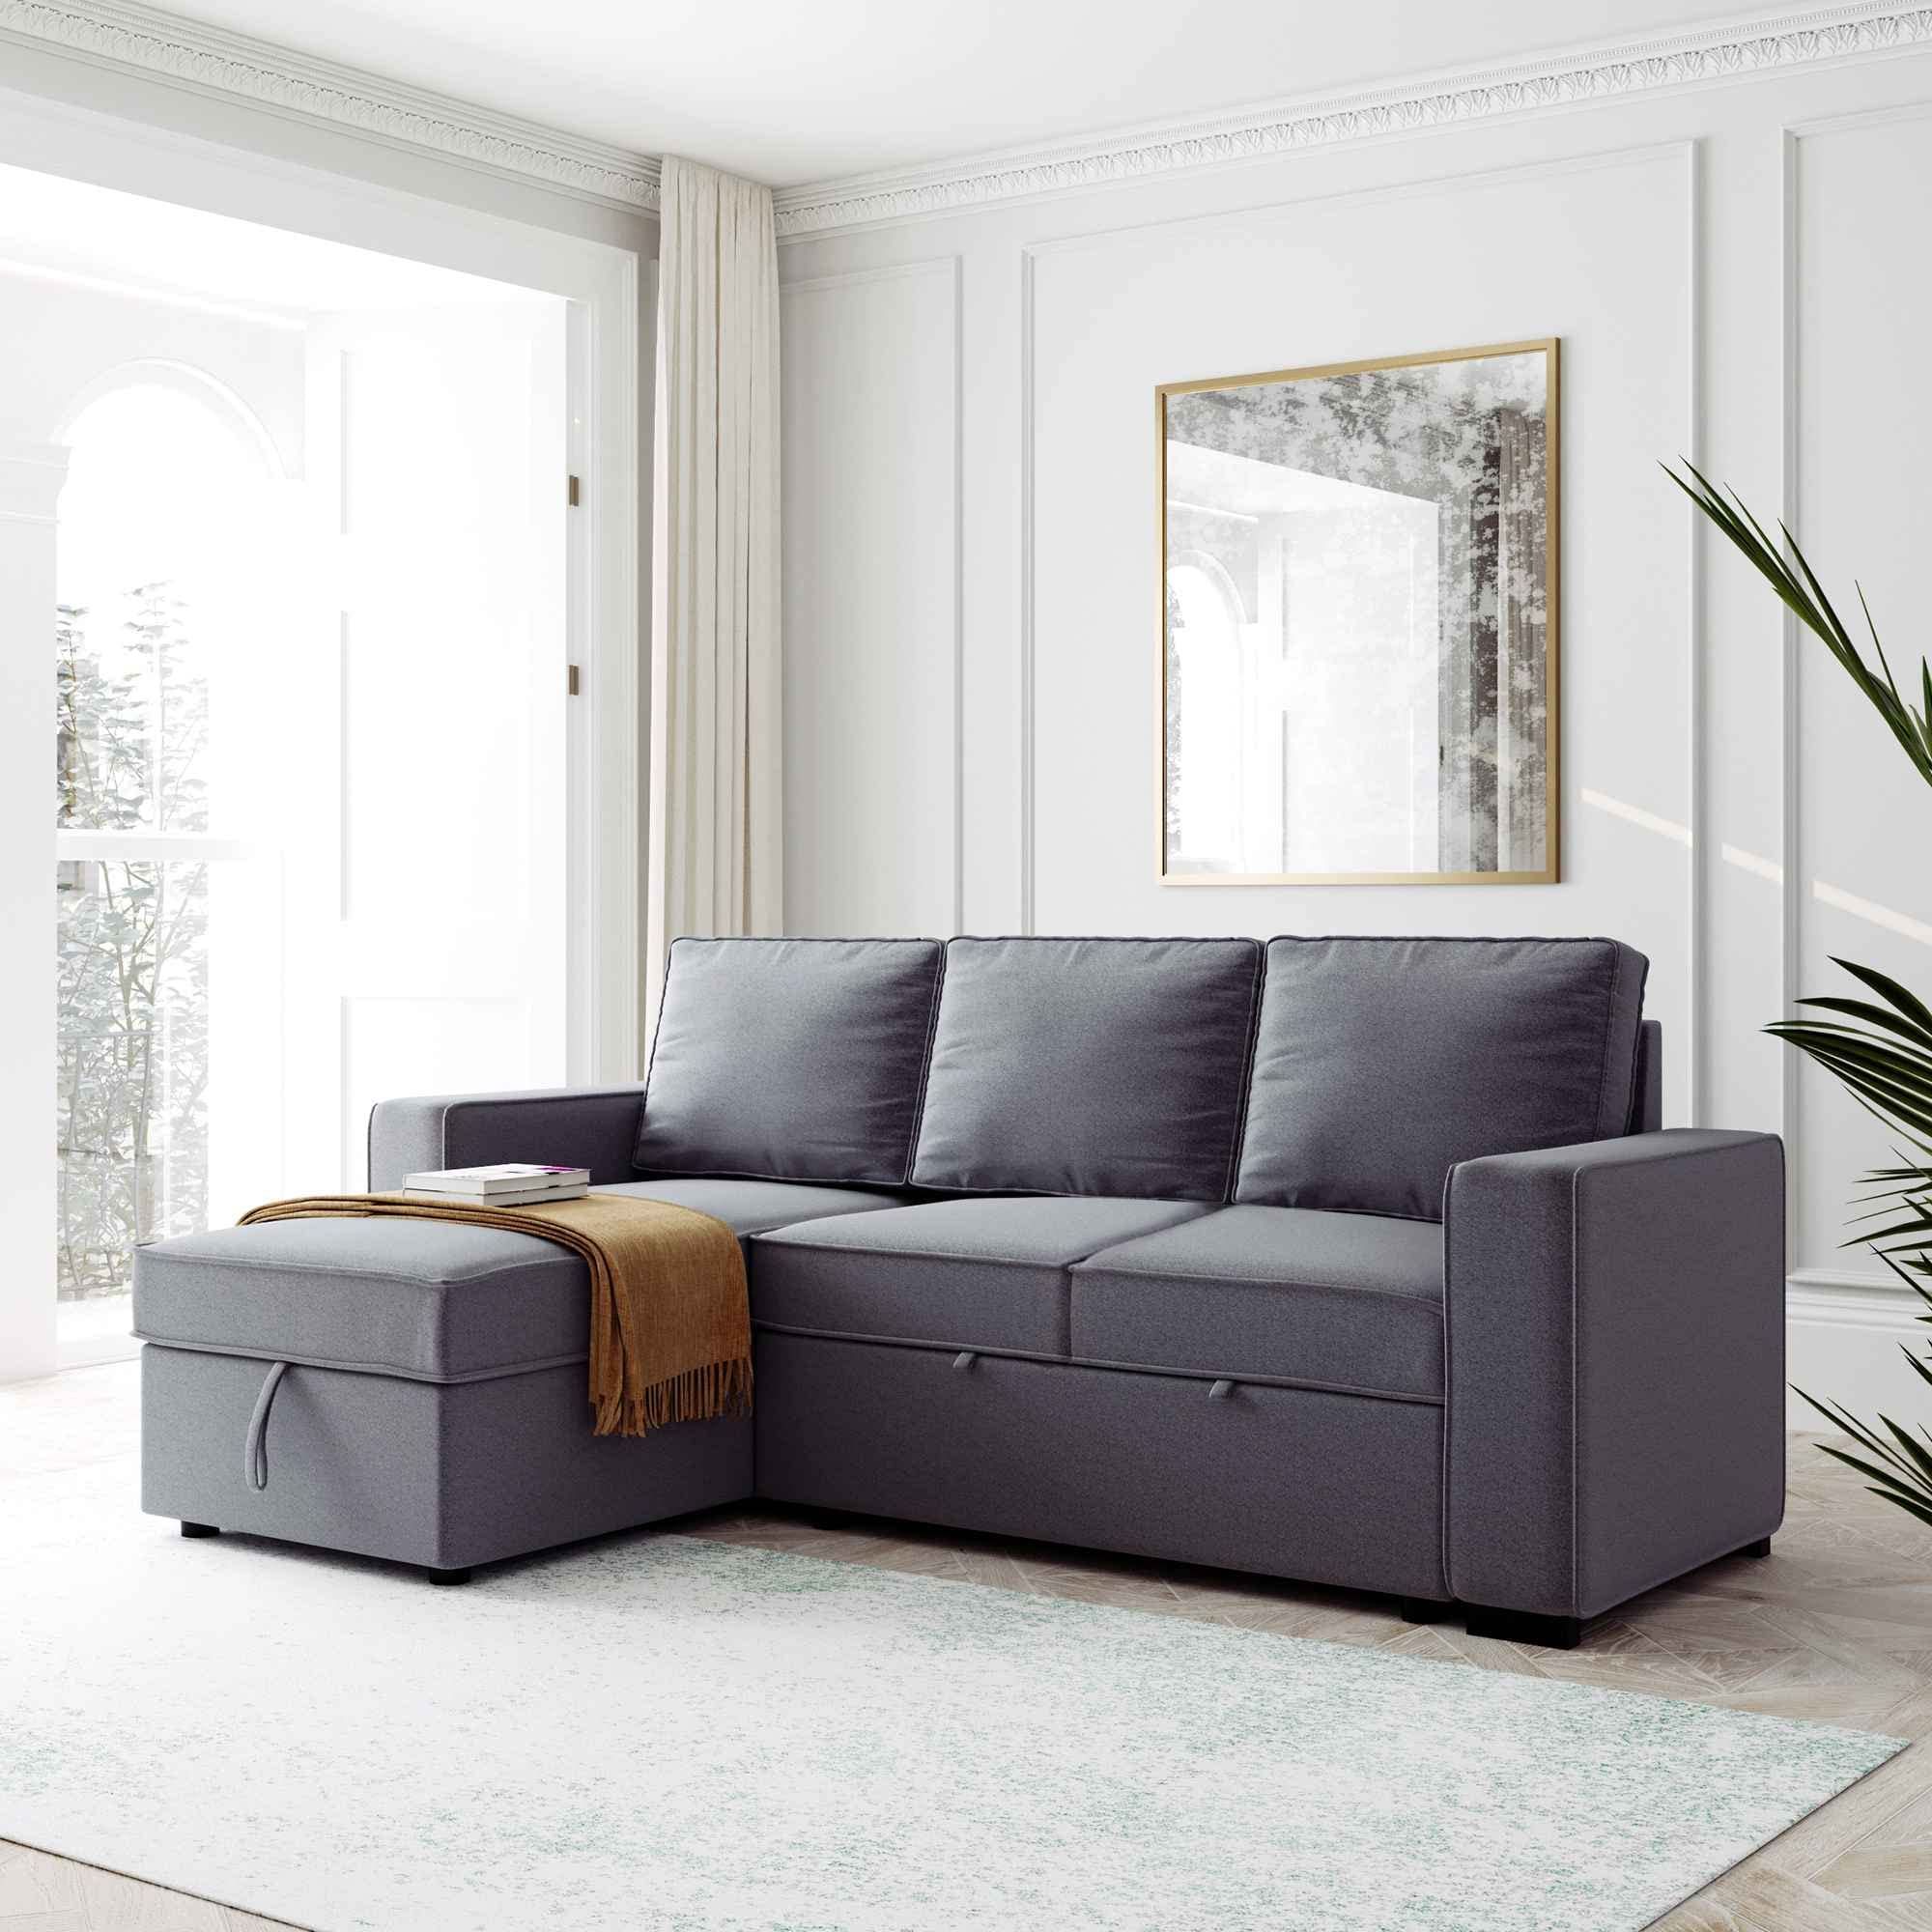 Most Recent L Shape Couches With Reversible Chaises In Buy Aty Sectional Sofa With Pull Out Bed, Reversible L Shape Sleeper (View 12 of 15)